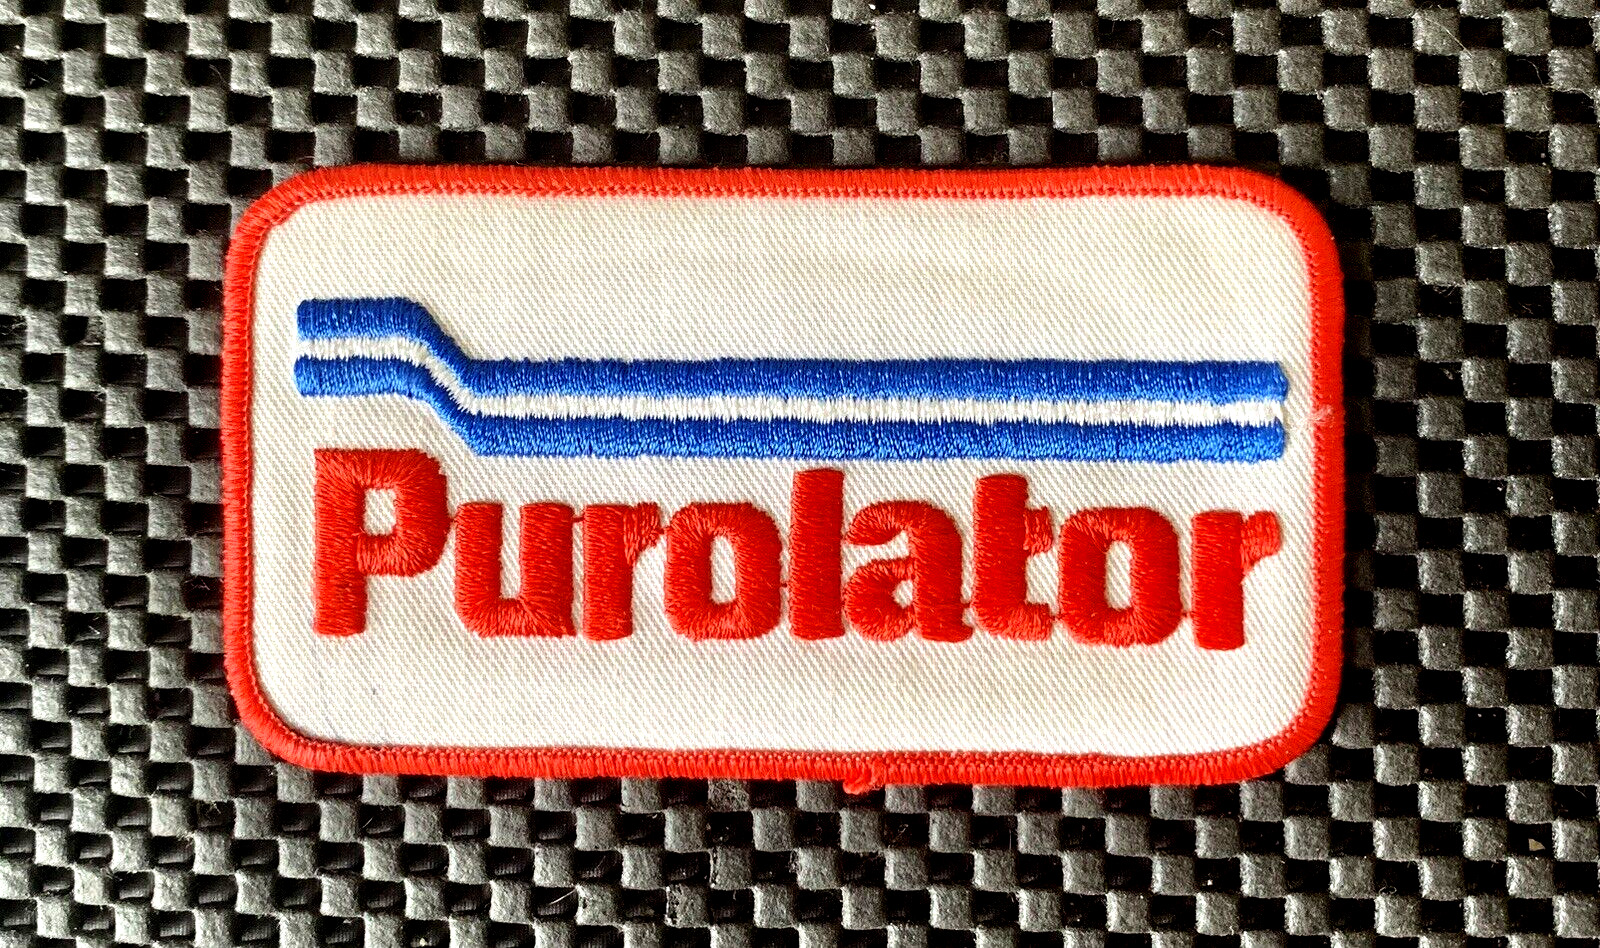 PUROLATOR EMBROIDERED SEW ON PATCH AUTO AIR OIL FILTERS 4 1/2” x 2 1/2” NOS